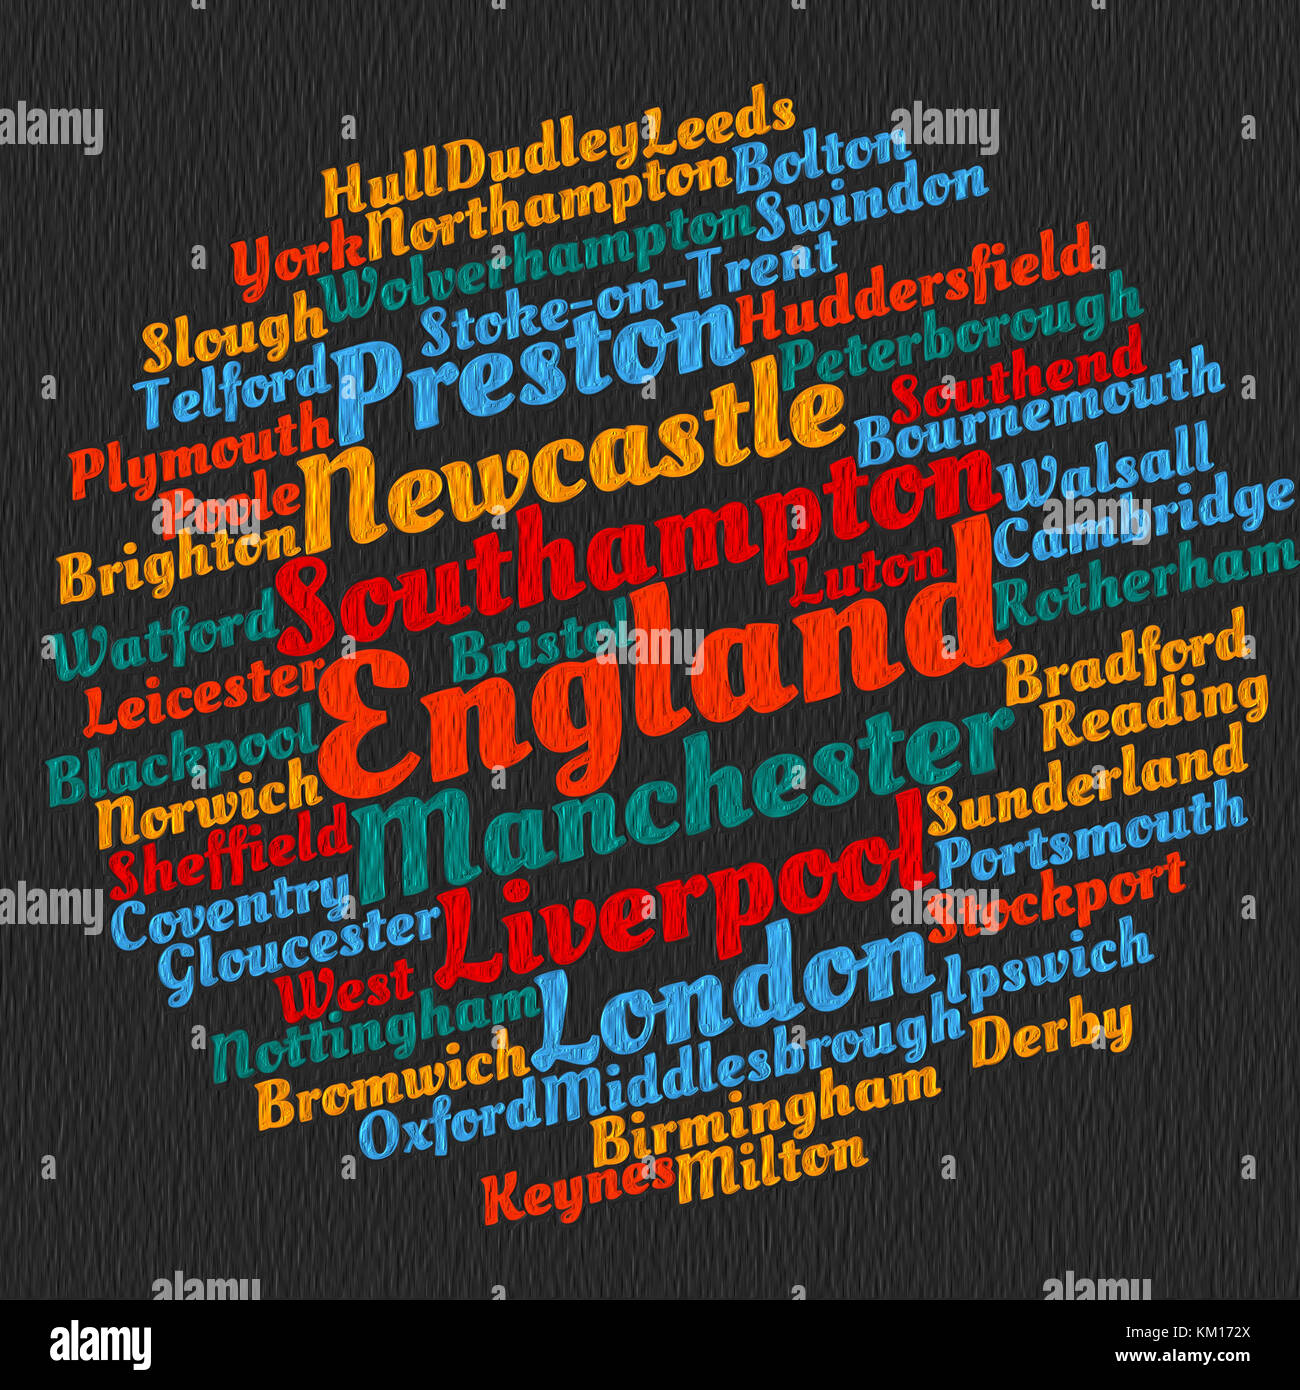 Localities in England word cloud concept Stock Photo